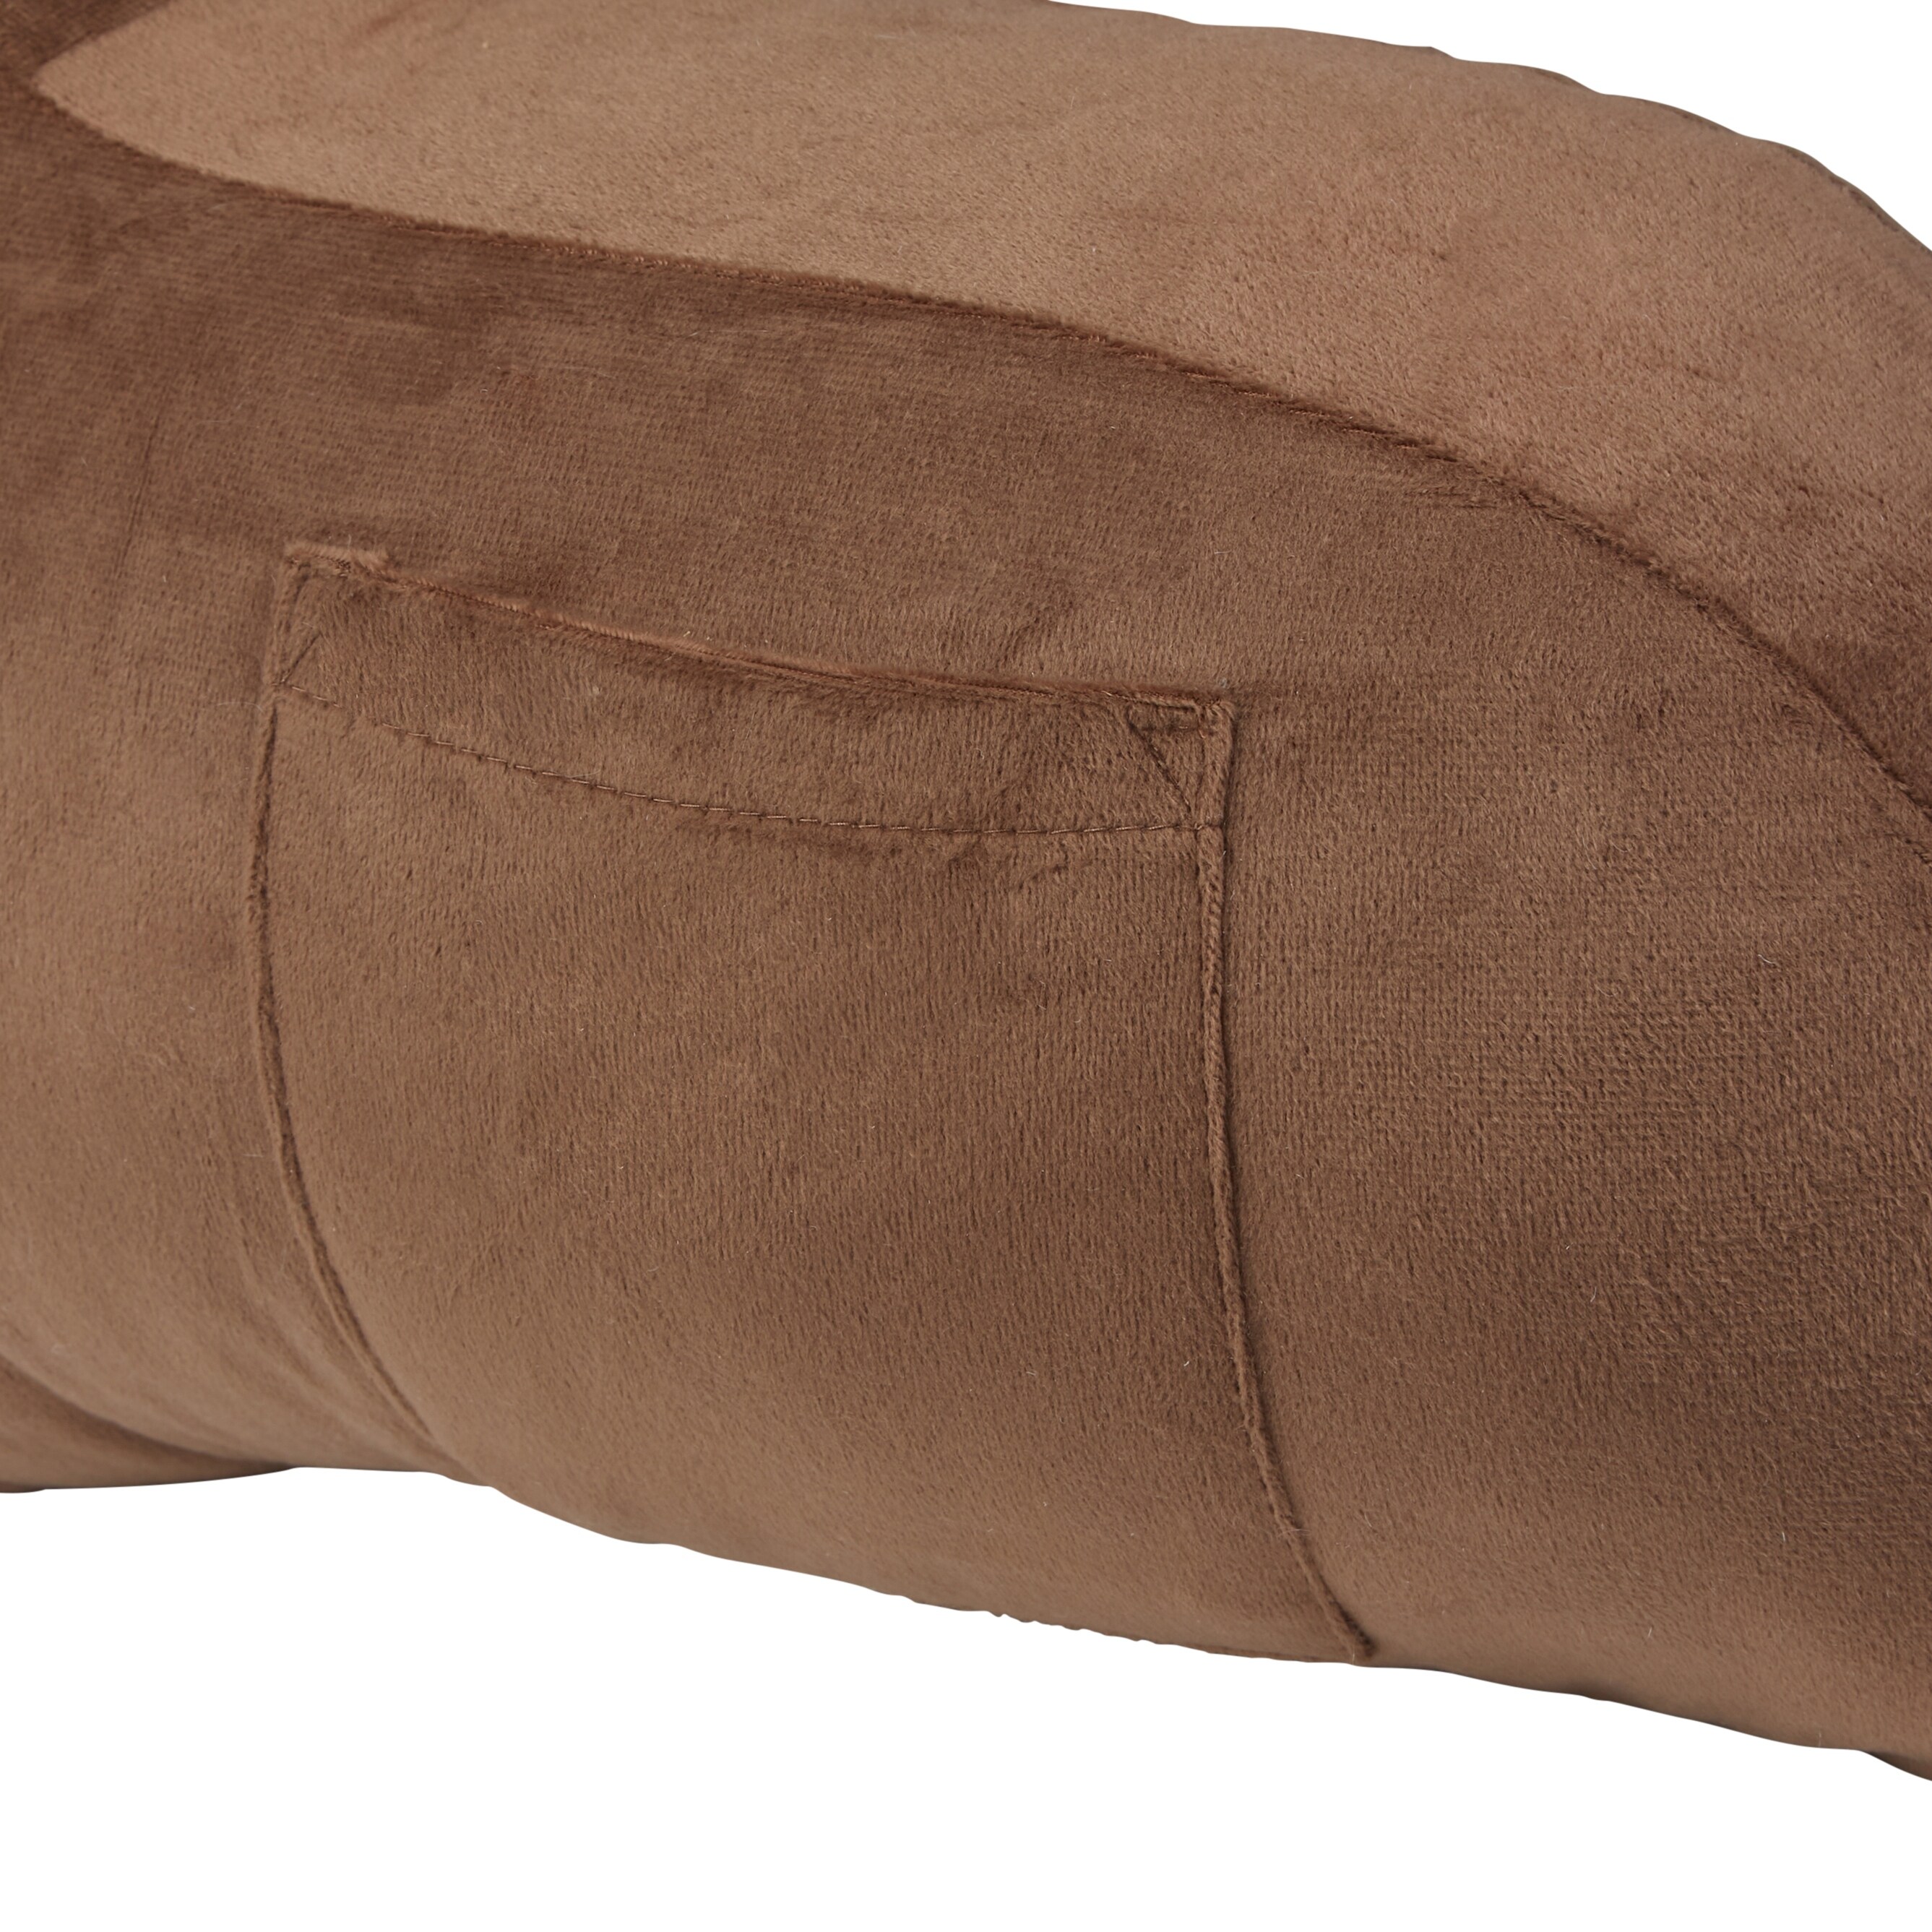 https://ak1.ostkcdn.com/images/products/is/images/direct/ed94cfbf1d8f755c8b1ca36c33063a09e20449eb/Klear-Vu-Velour-Bed-Rest-Back-Support-Pillow-with-Pocket-and-Handle.jpg